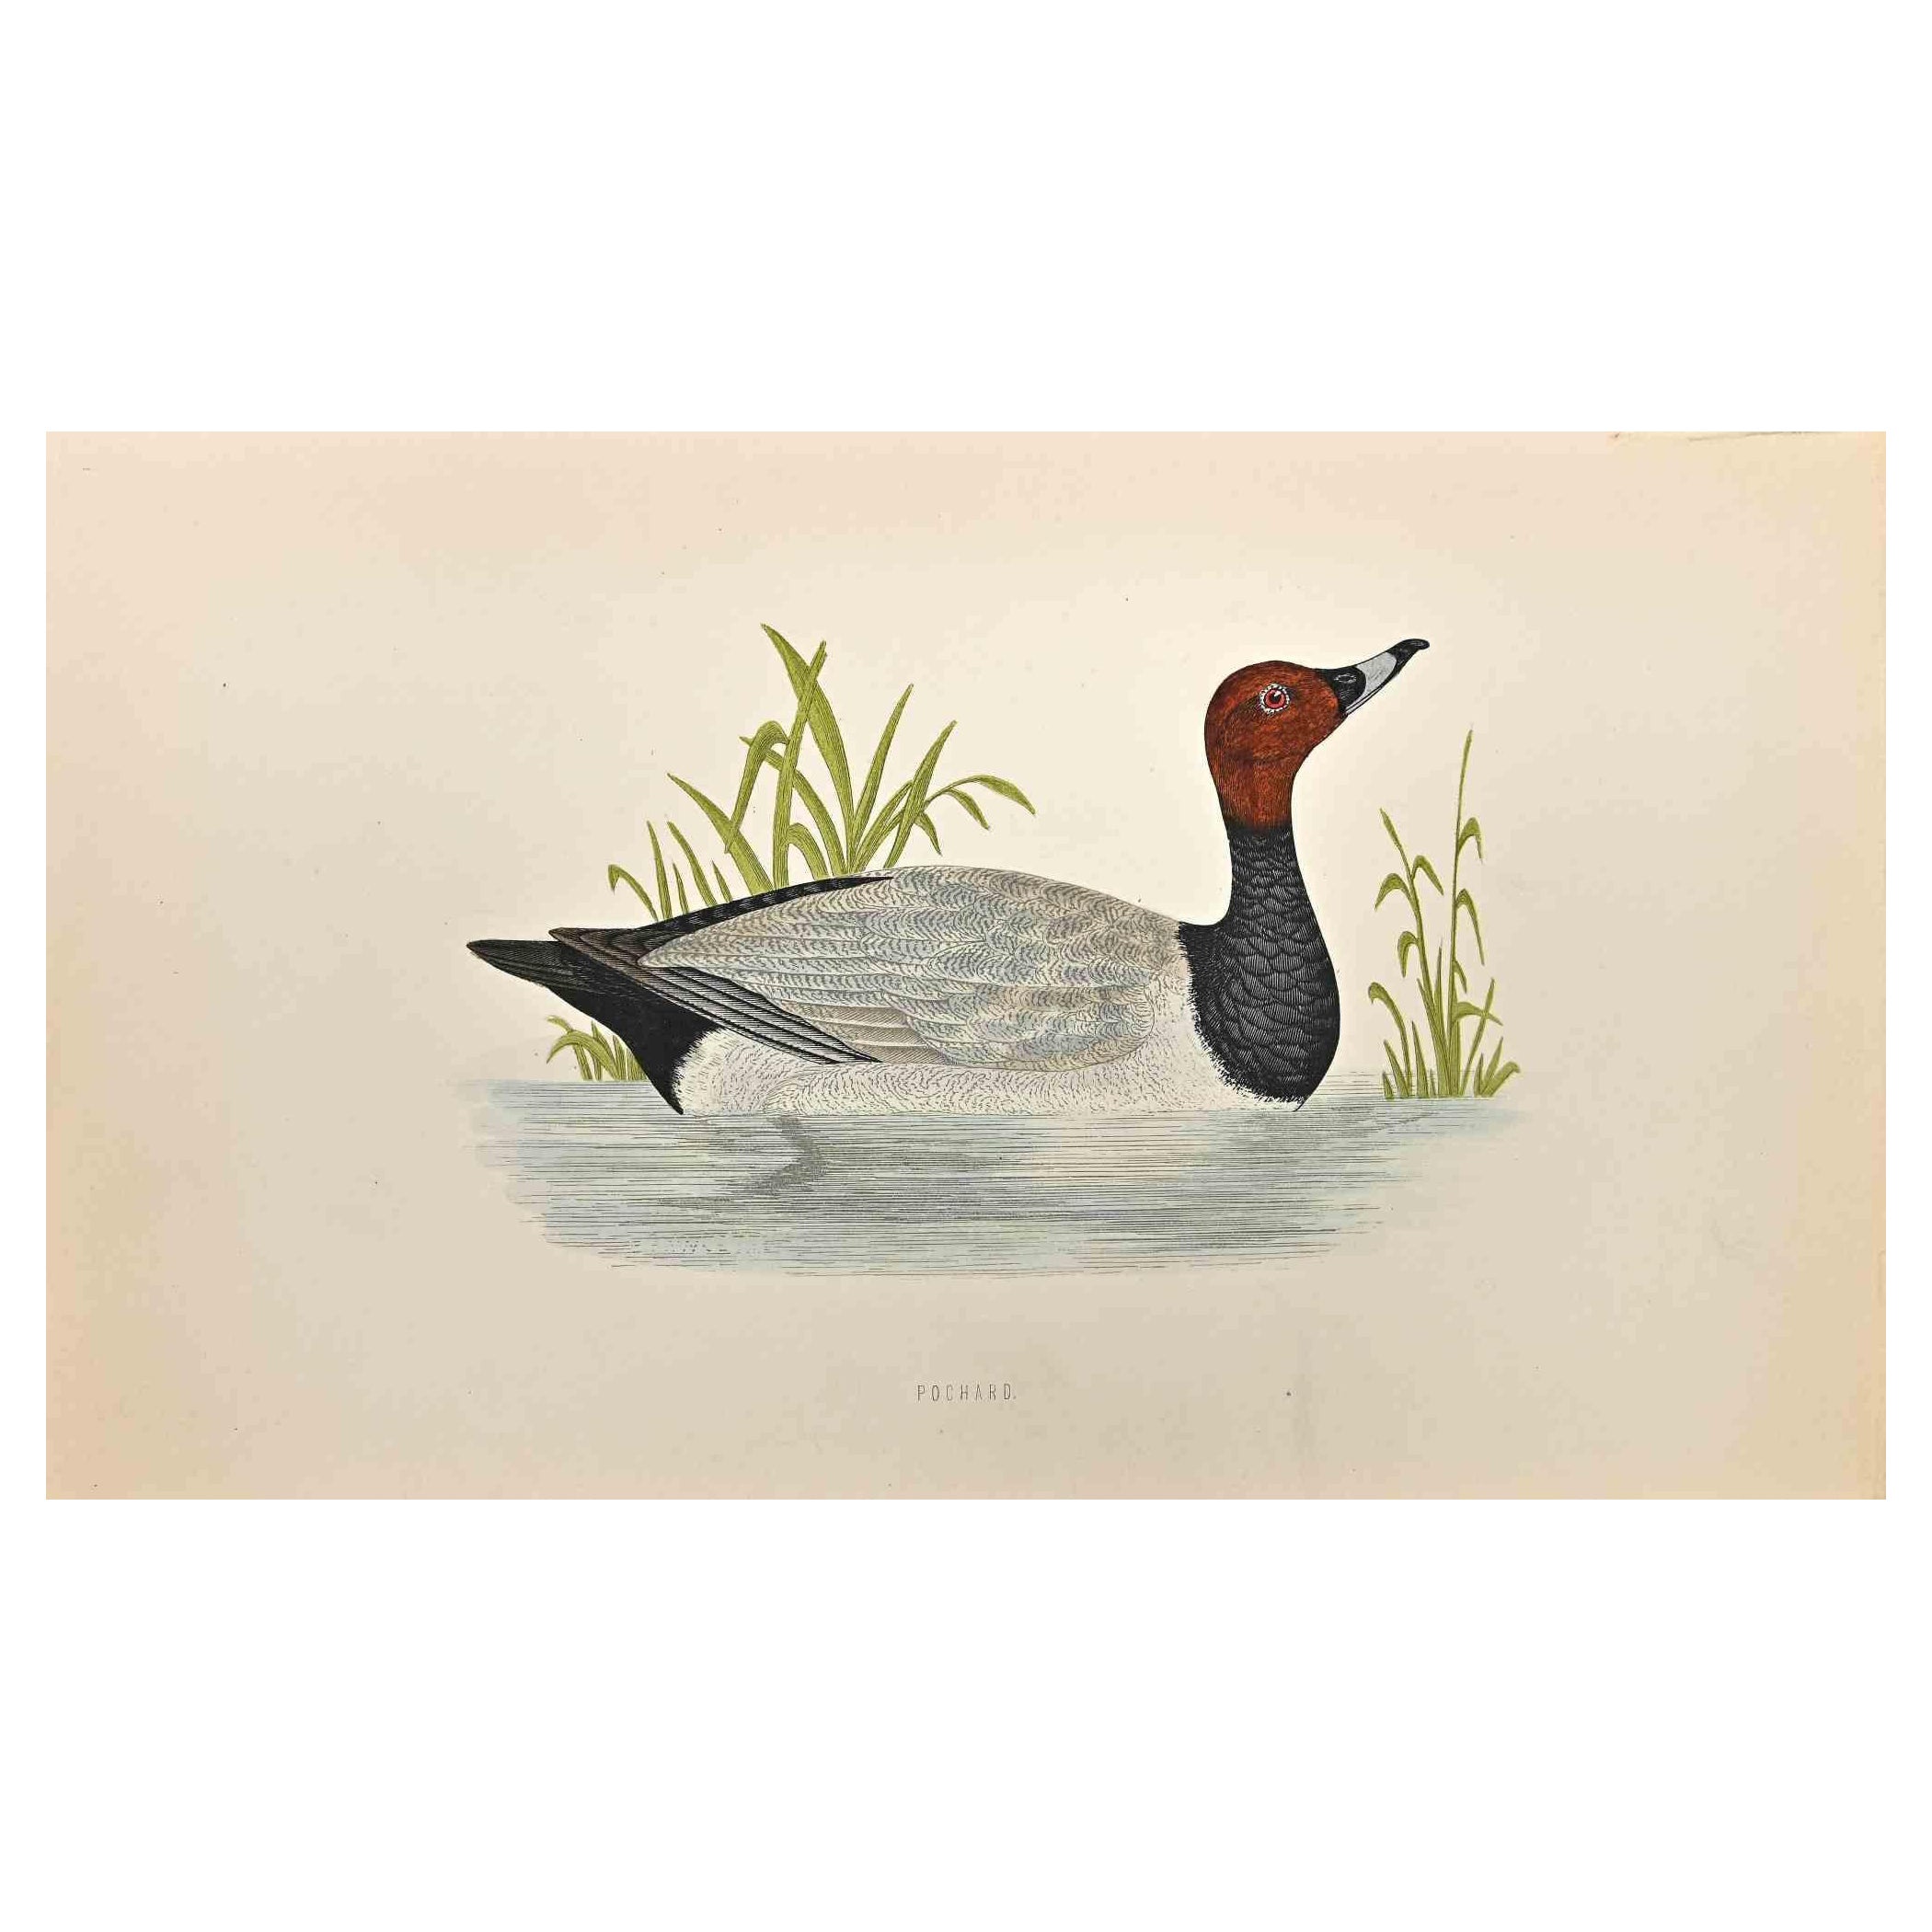 Pochard is a modern artwork realized in 1870 by the British artist Alexander Francis Lydon (1836-1917).

Woodcut print on ivory-colored paper.

Hand-colored, published by London, Bell & Sons, 1870.  

The name of the bird is printed on the plate.